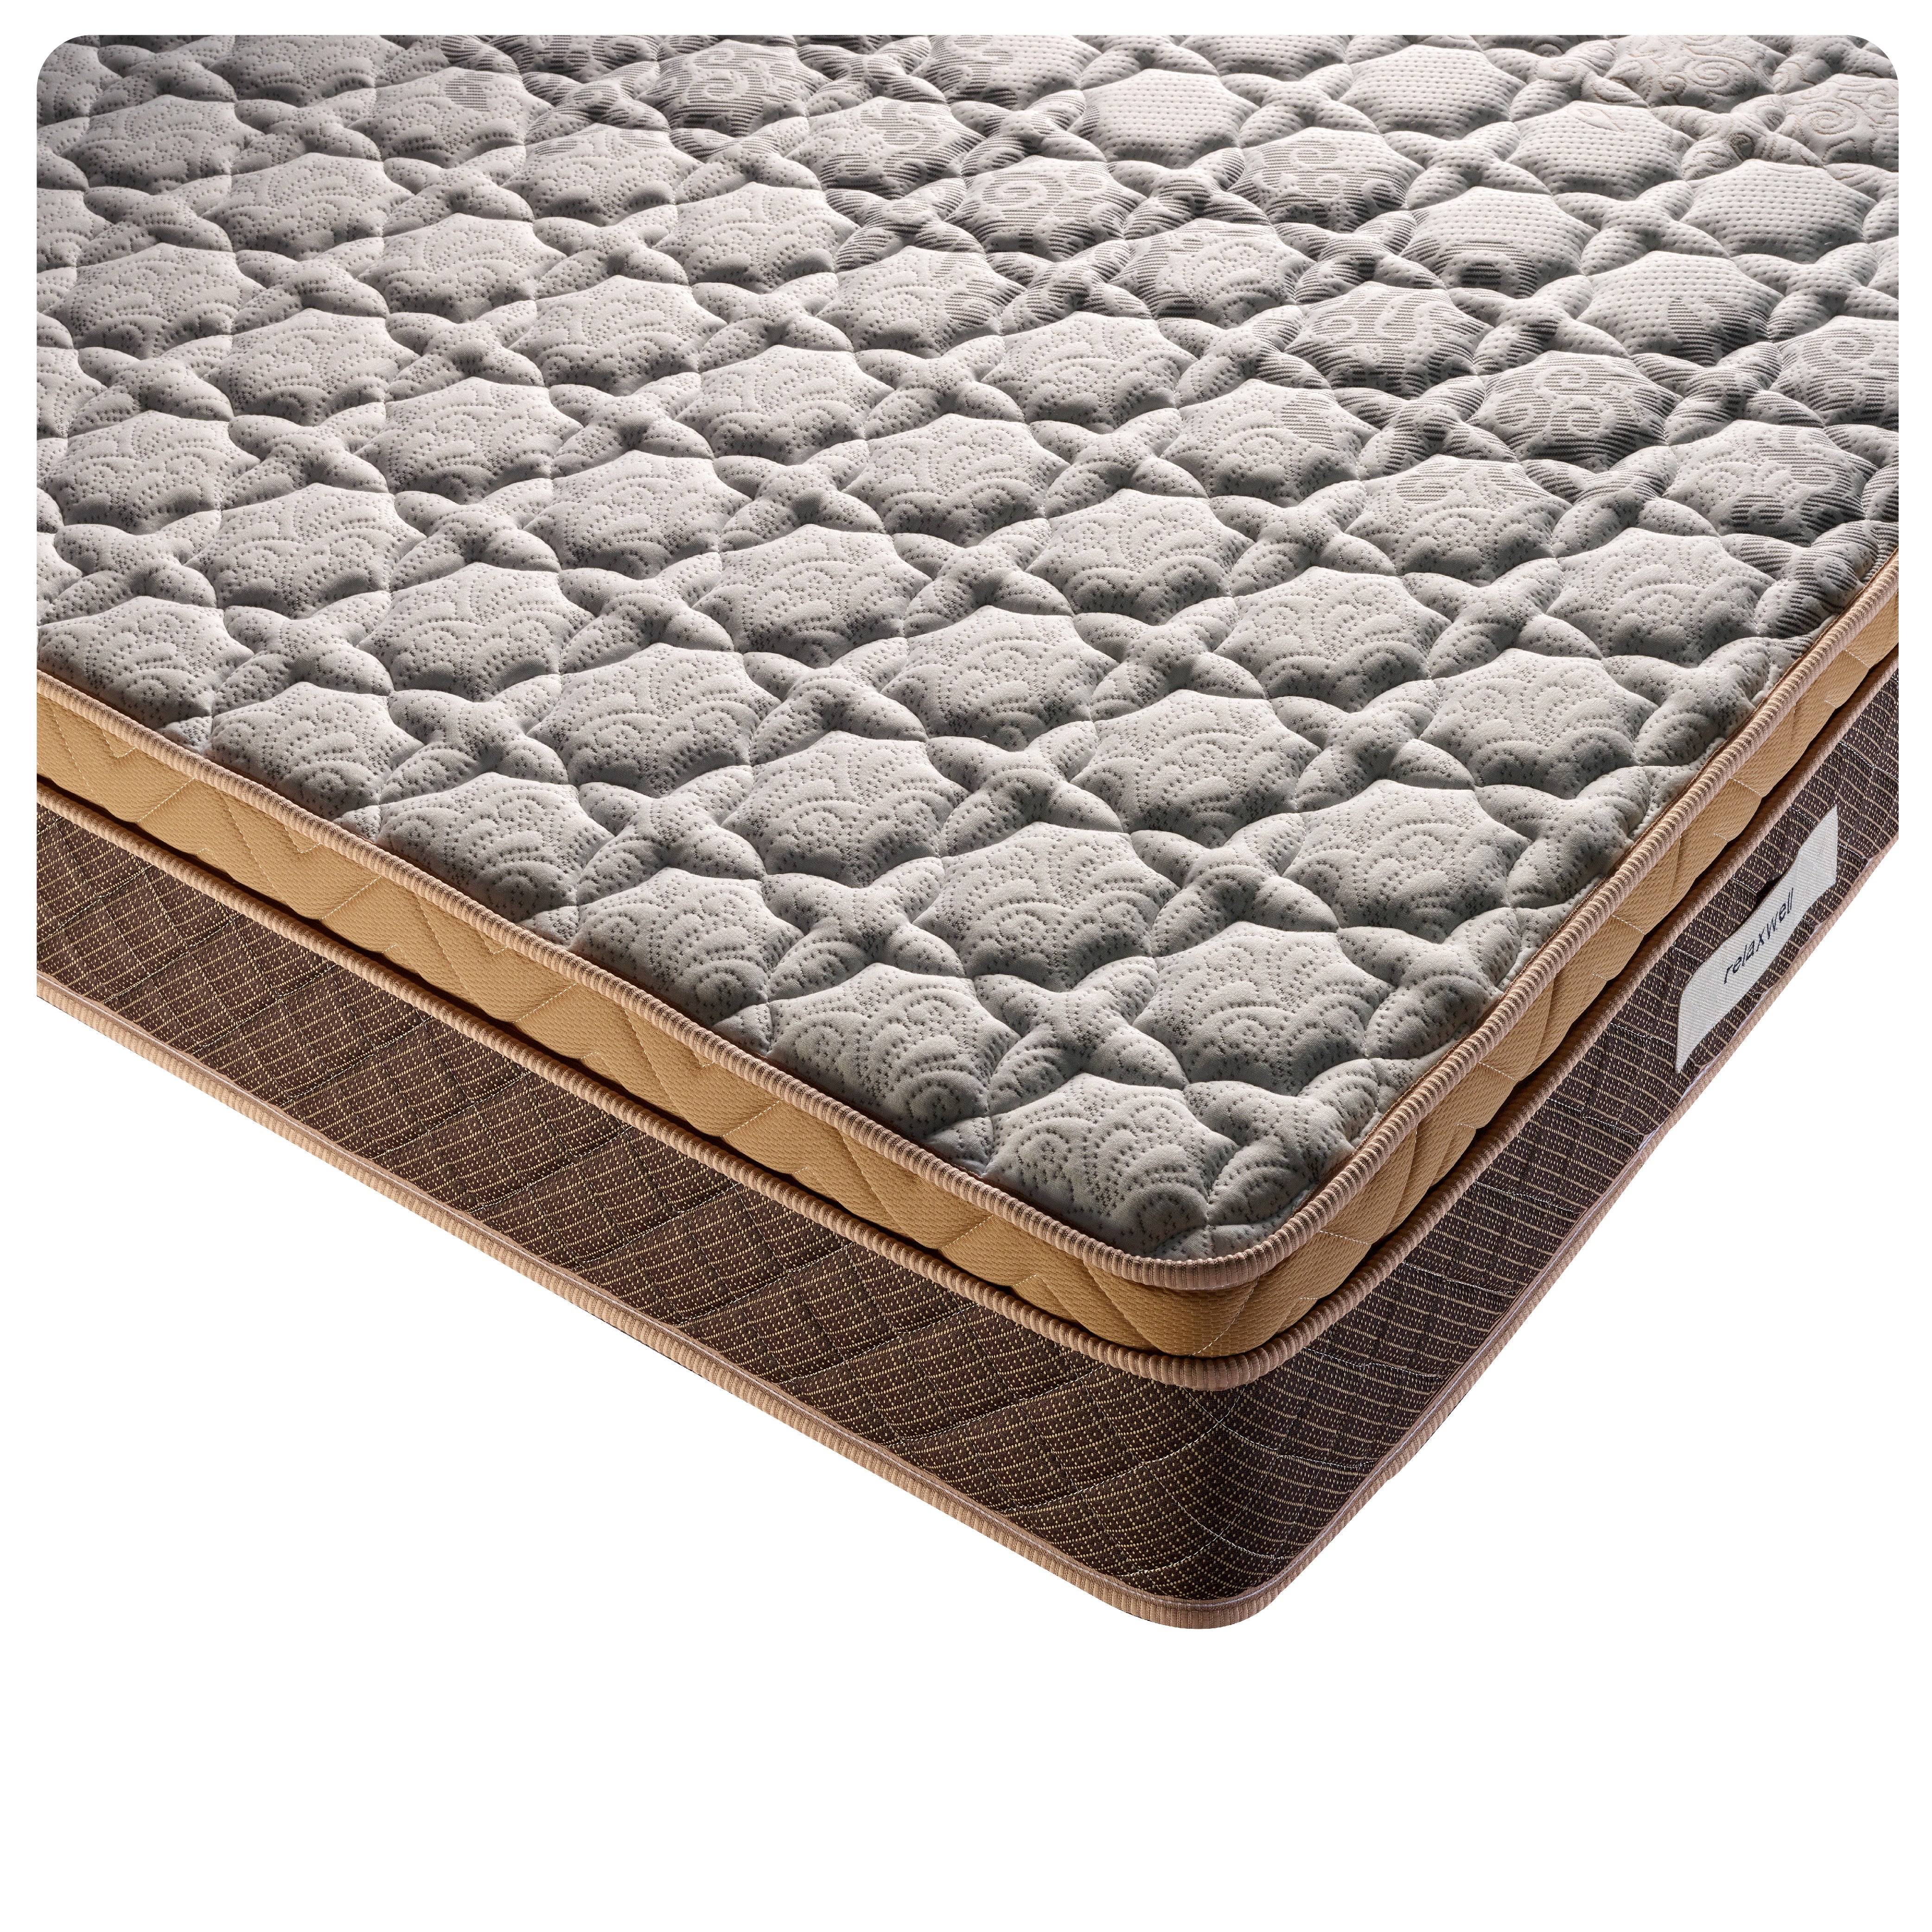 Buy Comfort Pocketed Spring Custom Mattress with Euro Top Finish